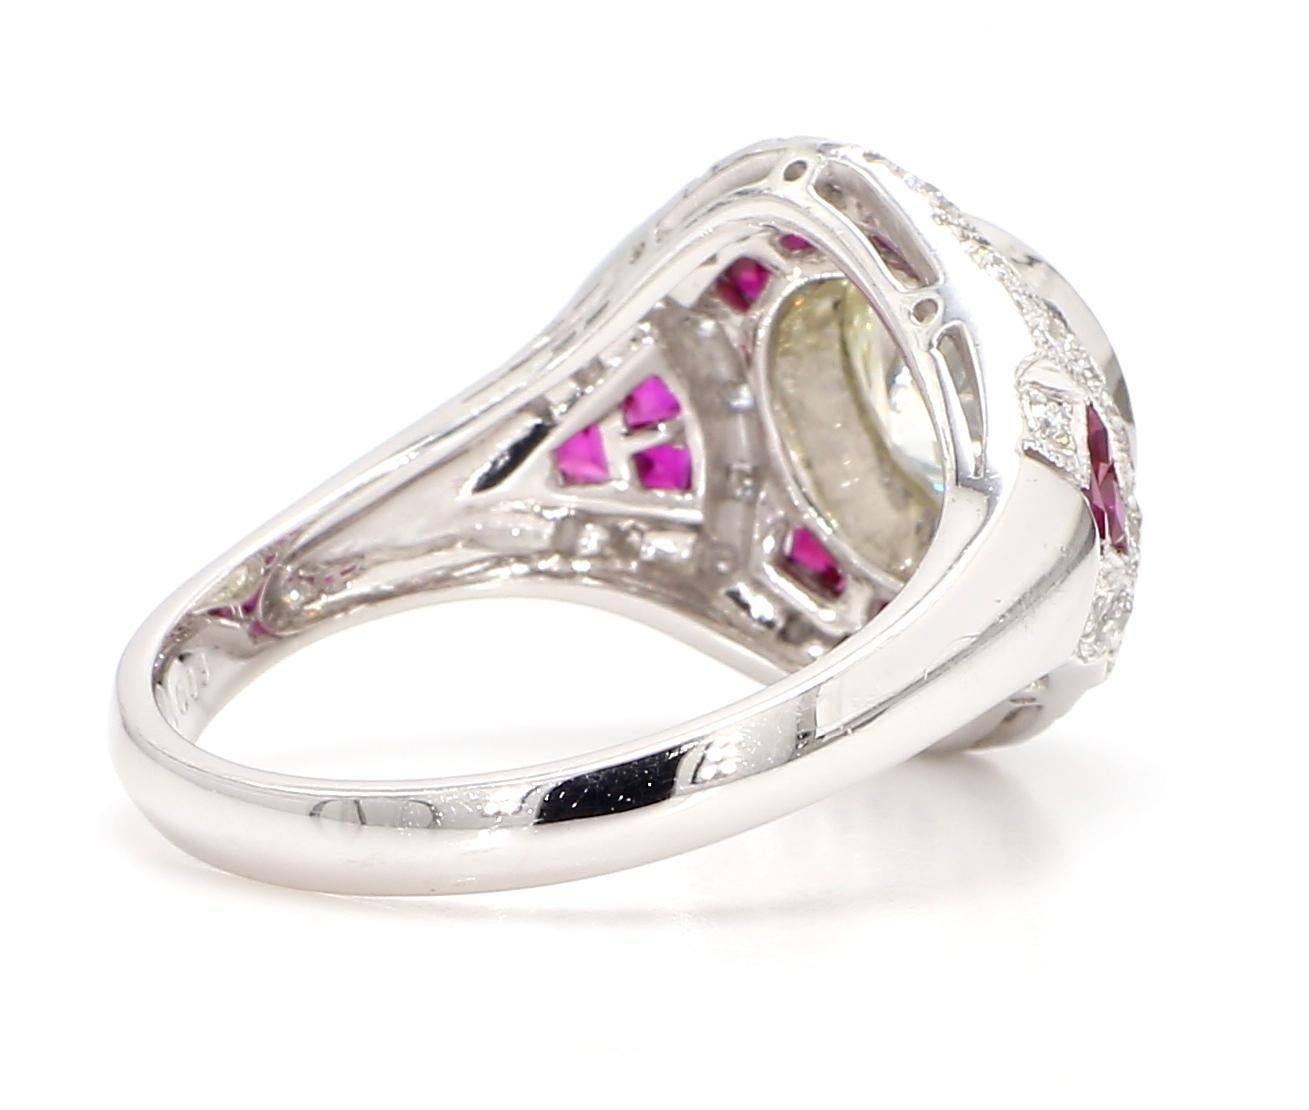 GIA Certified 2.56 Carat Diamond and 1.15 Carat Ruby Art Deco Platinum Ring For Sale 1